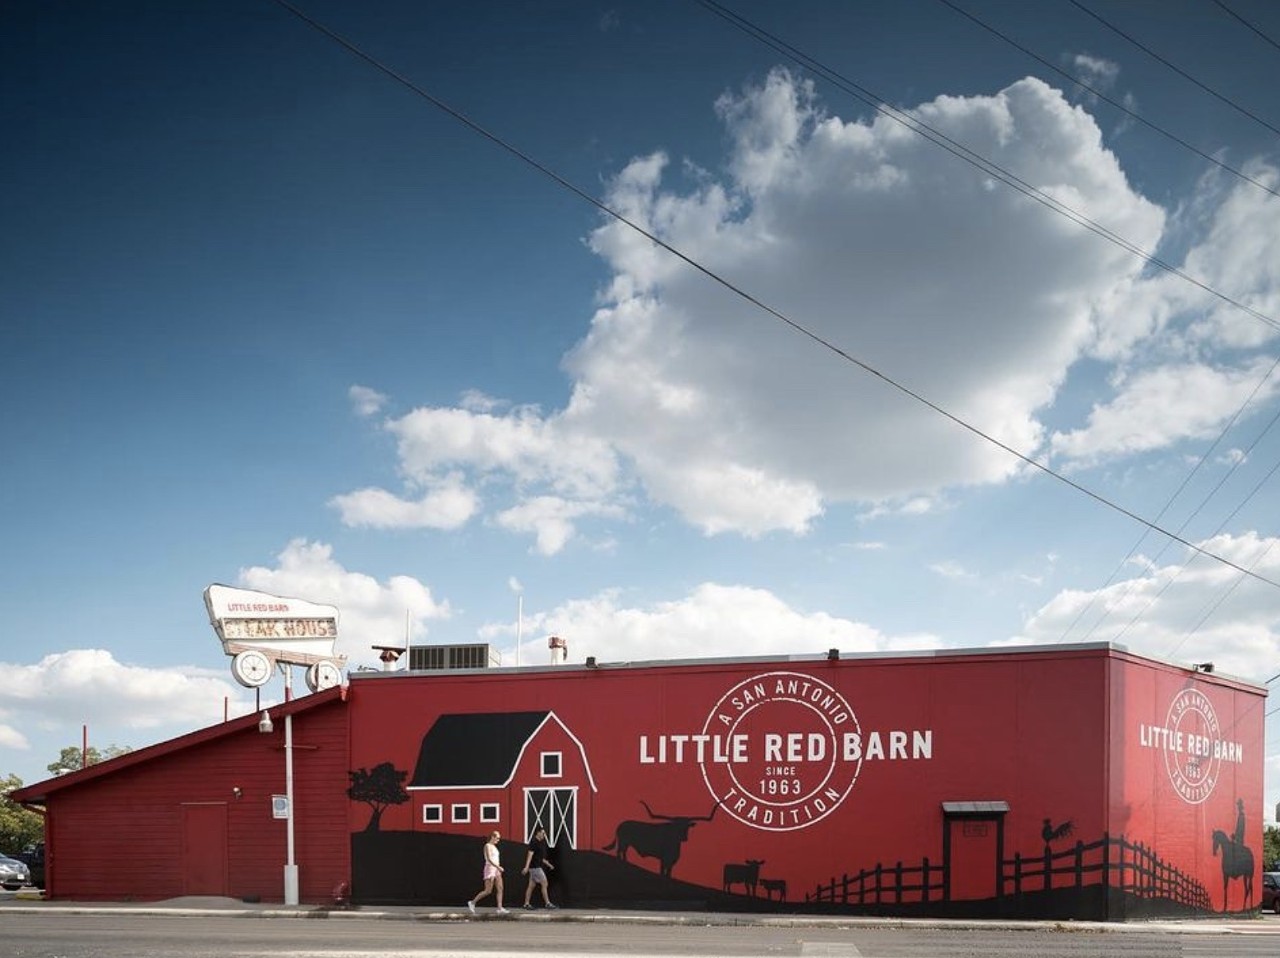 Little Red Barn Steakhouse
1836 S. Hackberry St., (210) 532-4235, lrbsteakhouse.com
Little Red Barn is a South Side staple — pr should we say stable? Doubtless, its down-home charm is part of the reason. Signature kitschy uniforms and Texas-sized portions have kept this favorite in business for over 60 years.